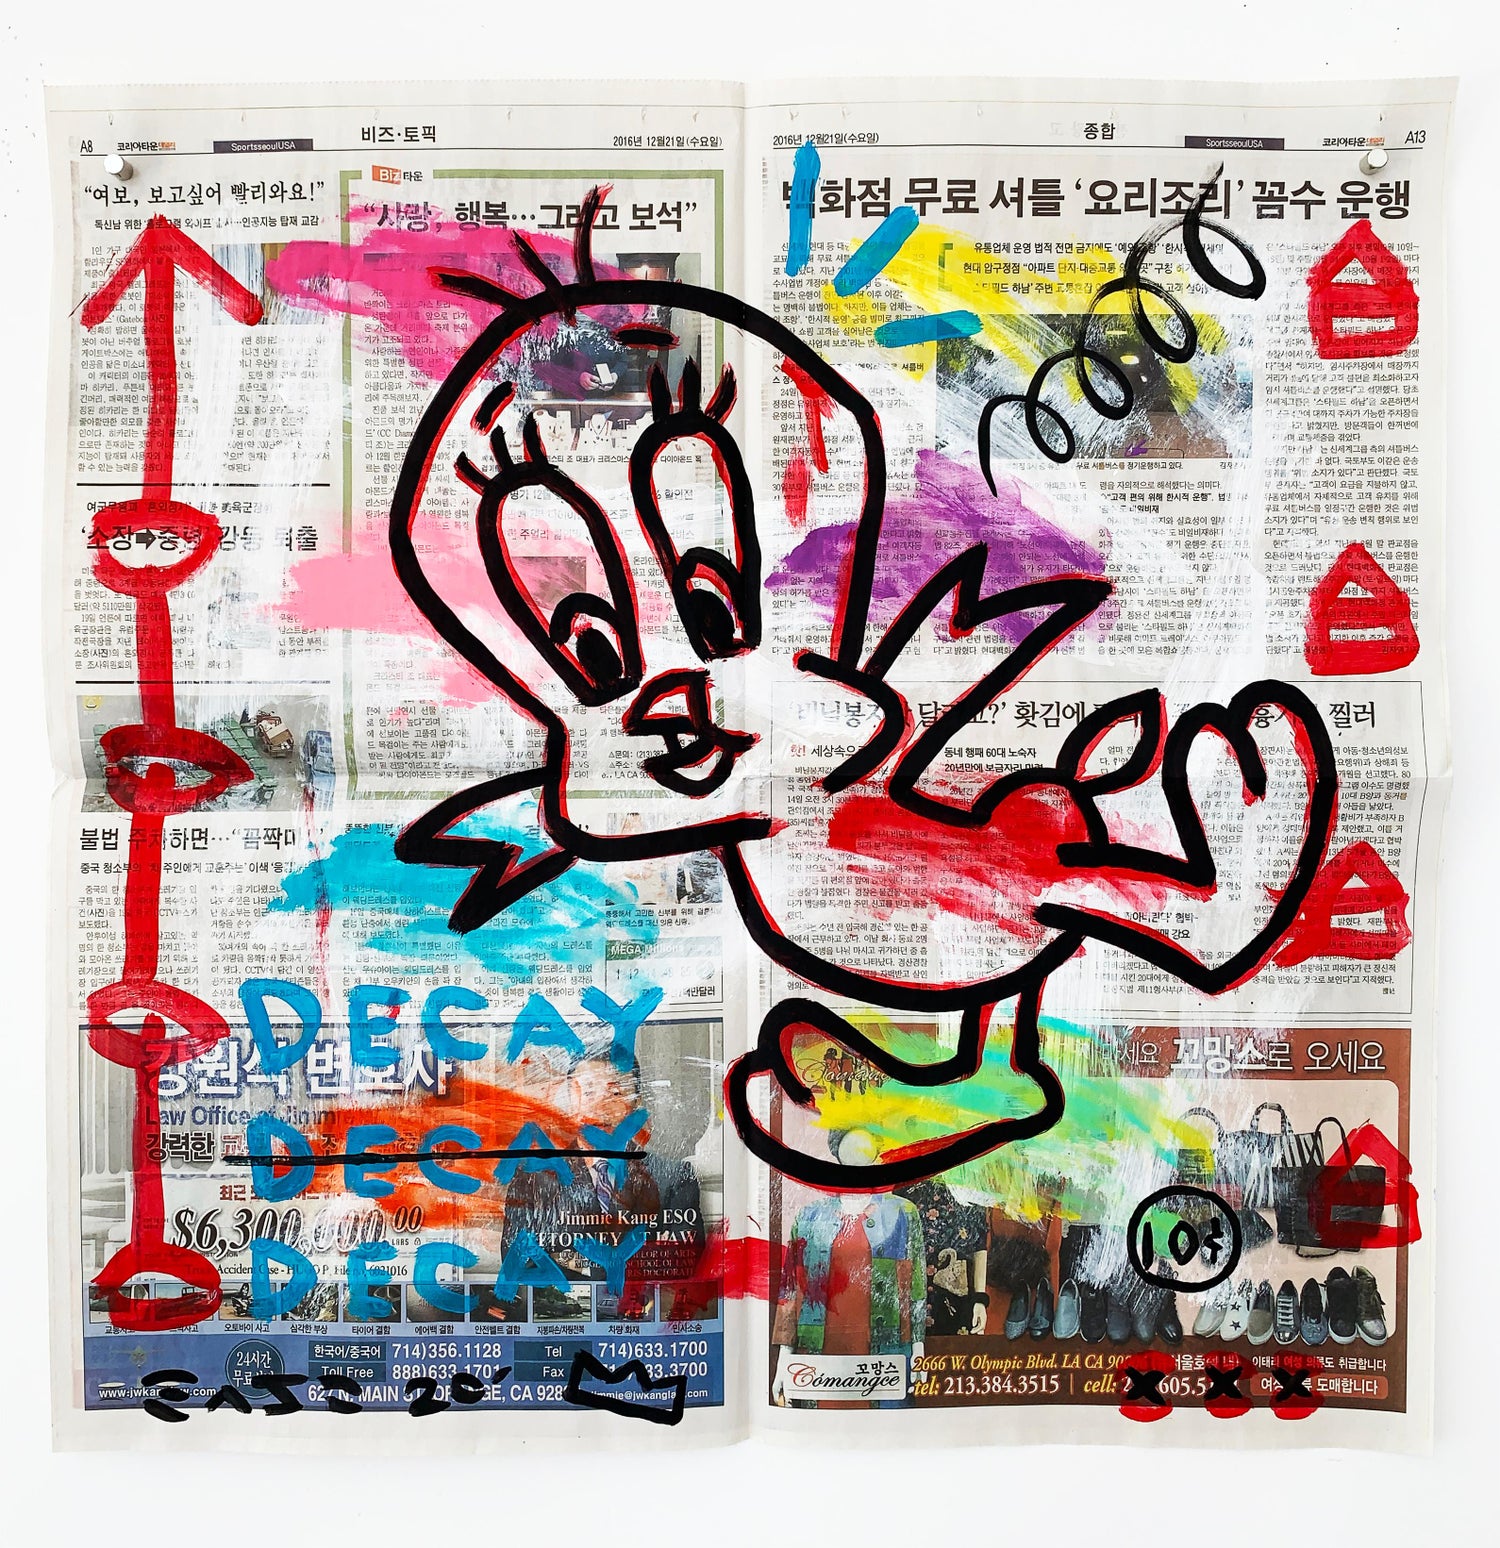 Gary John - "Tweety Decay" Acrylic and Collage on Korean newsprint For Sale  at 1stDibs